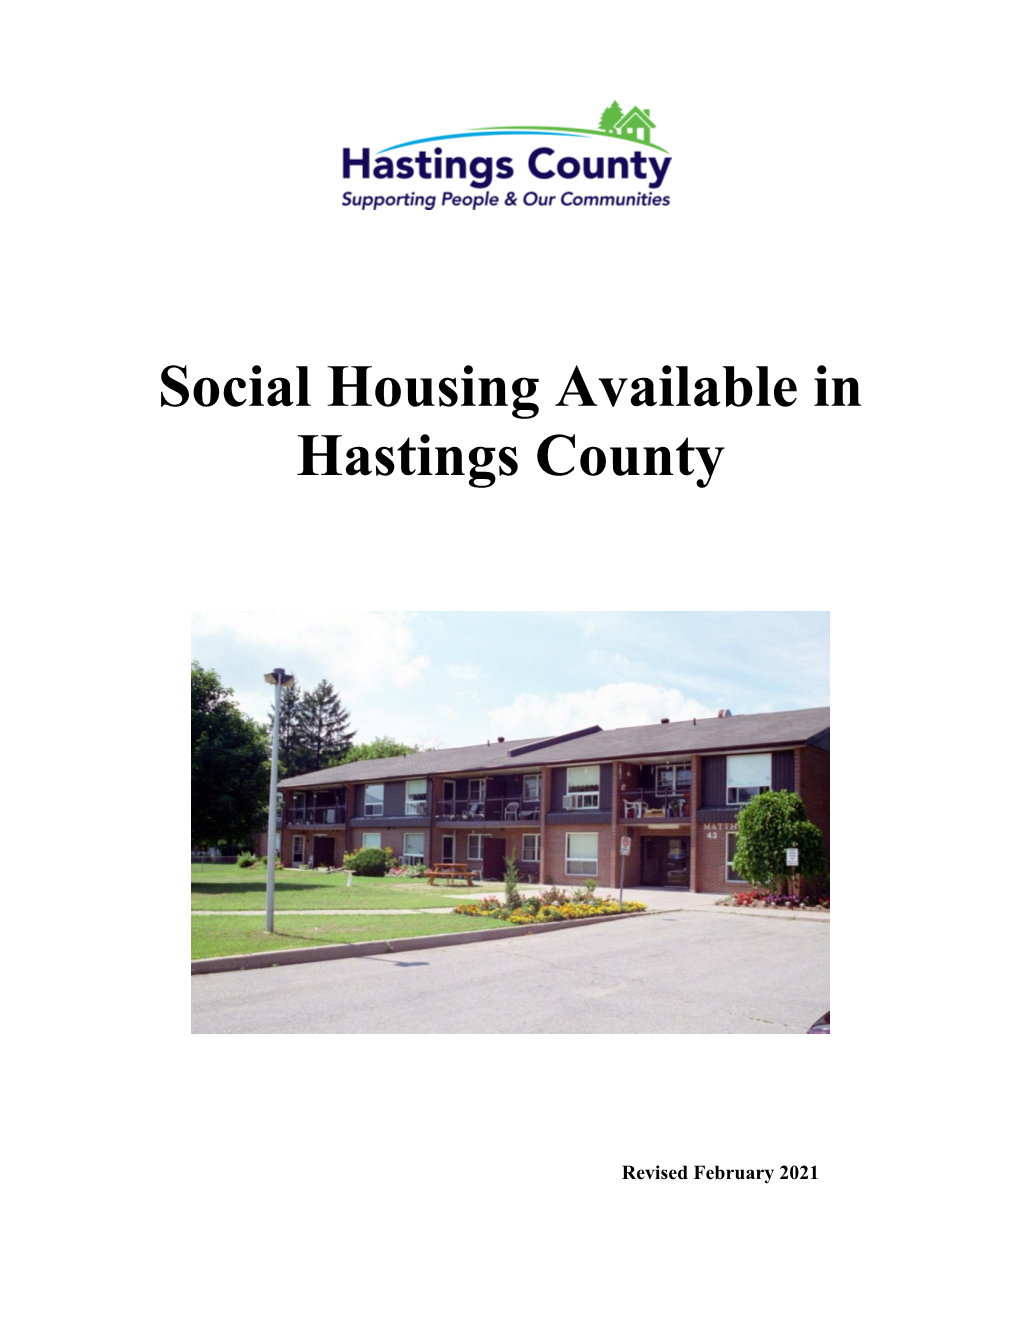 Social Housing Available in Hastings County